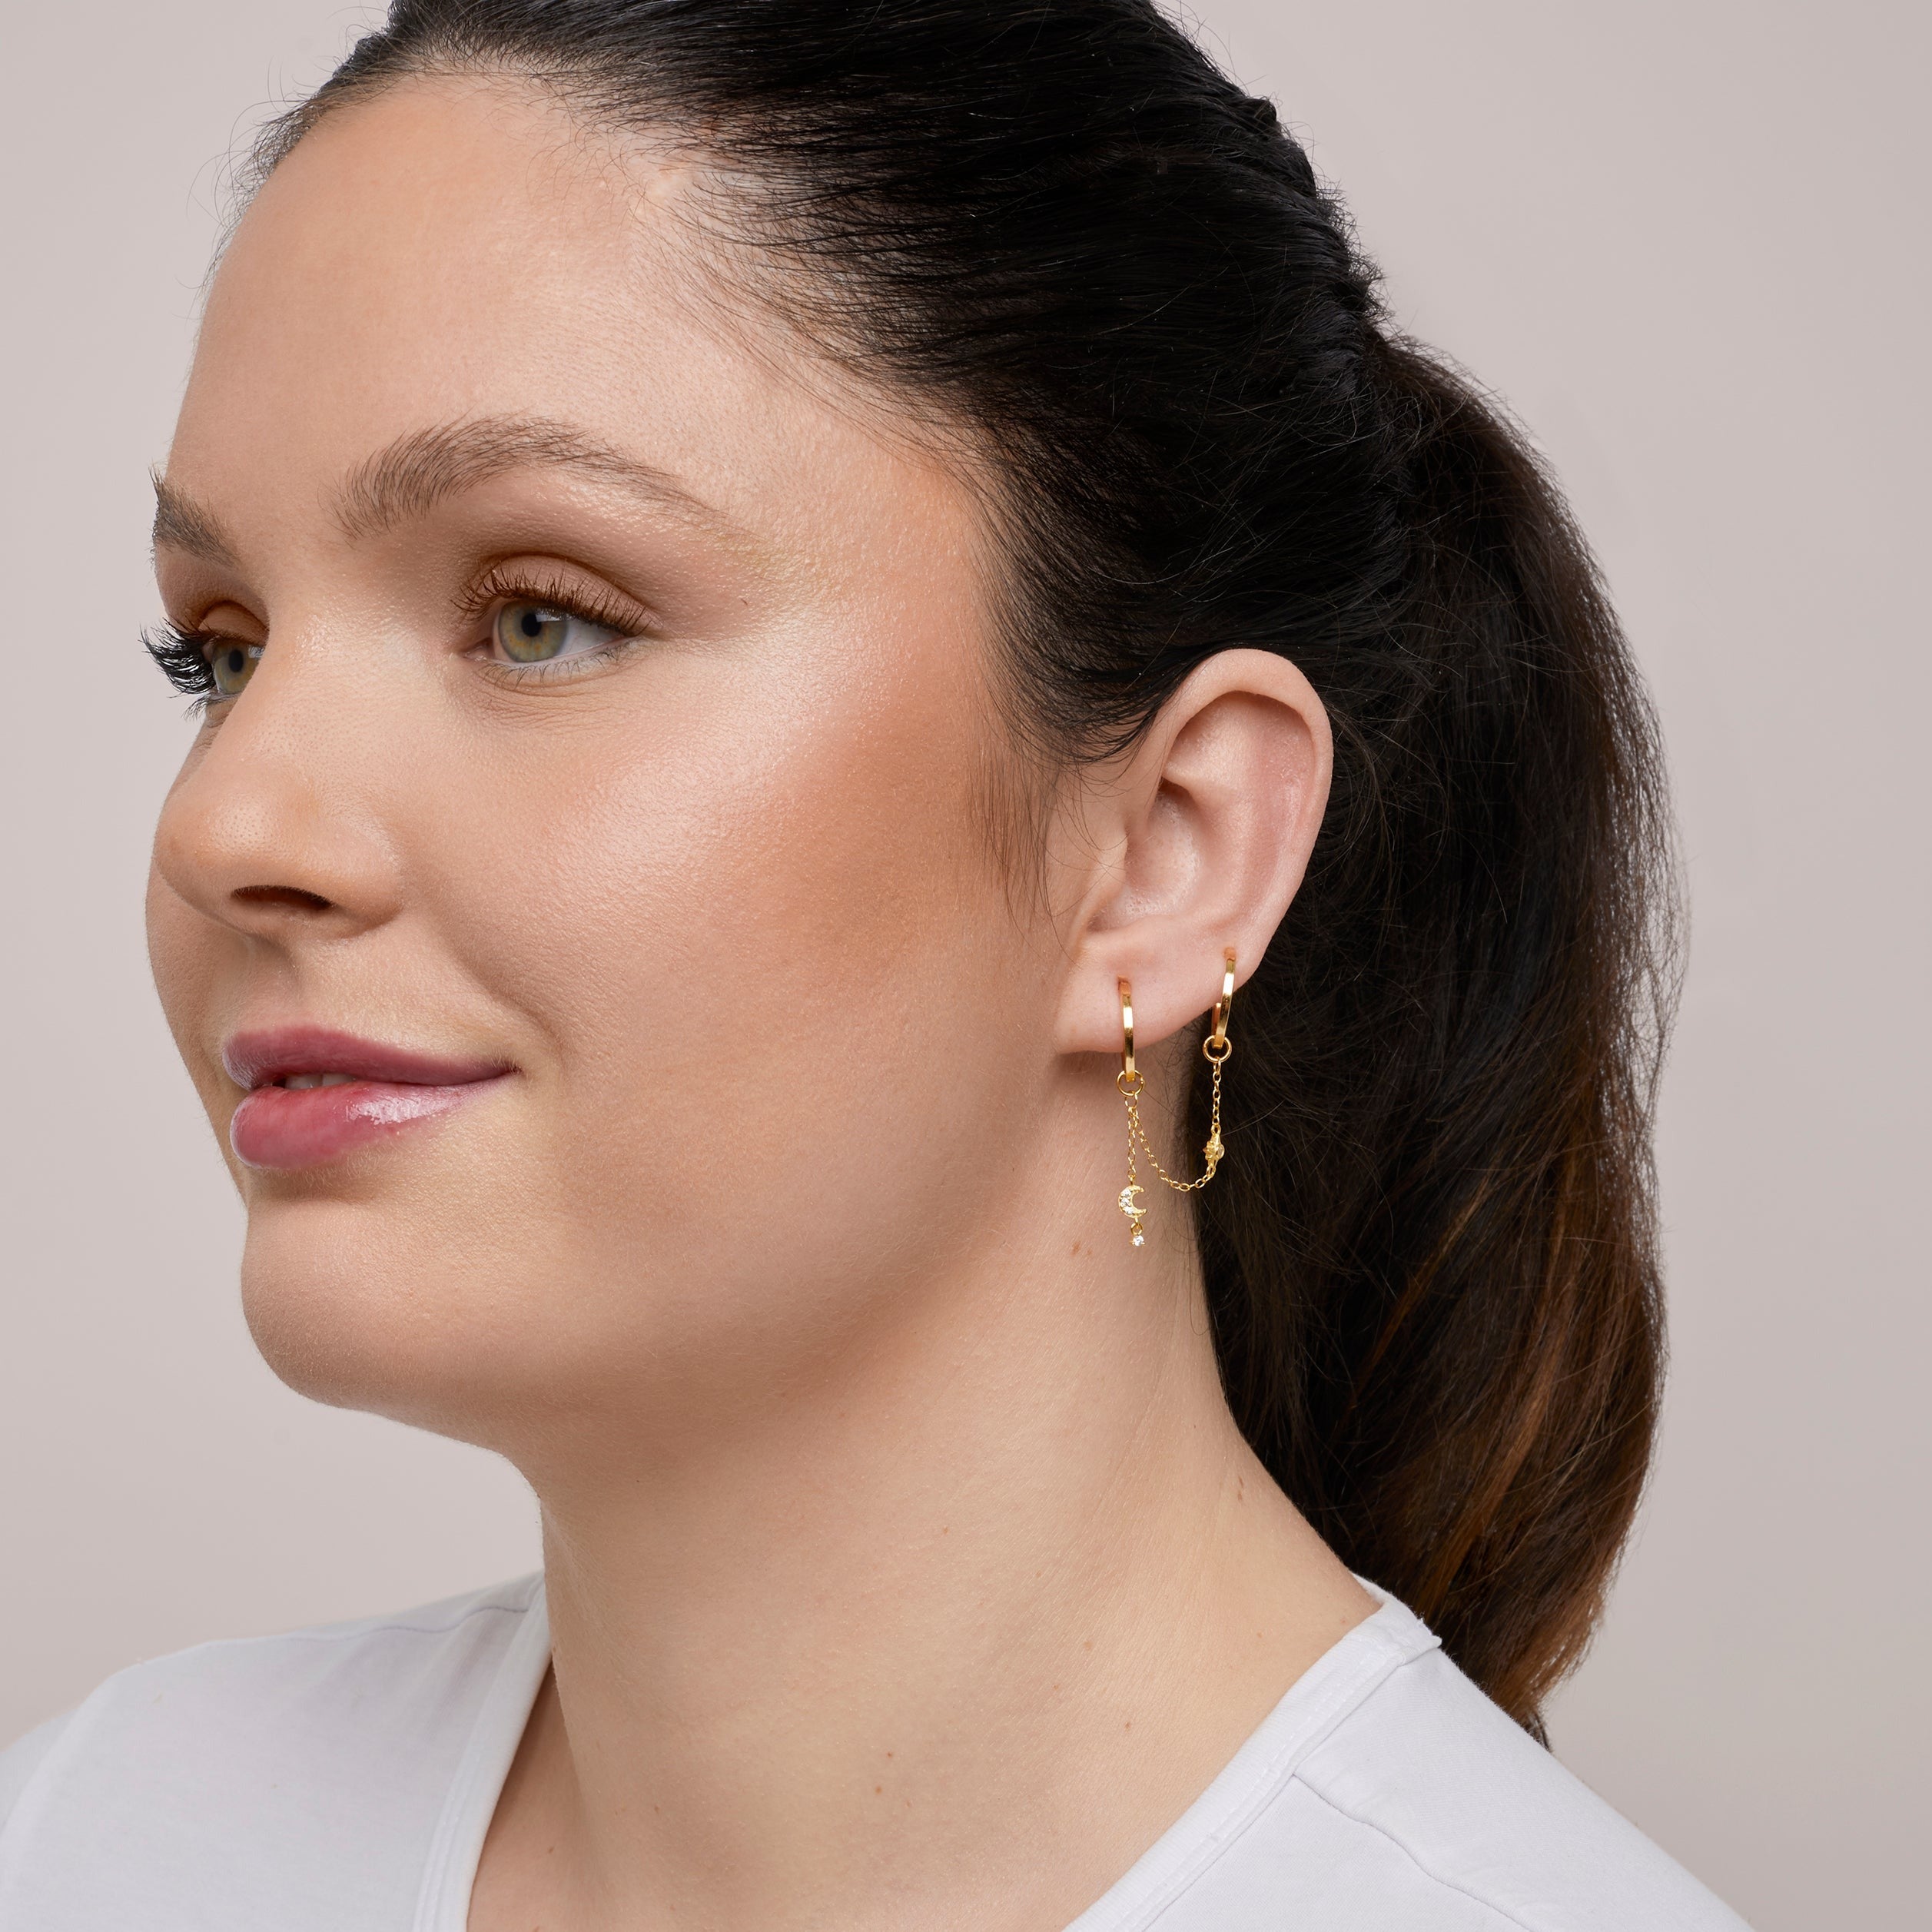 A model wearing the Single Celestial Hoop Chain are made with high-quality materials, including 18K gold plating over 925 Sterling Silver. These charms are both non-tarnish and water resistant. The perfect combination of style and durability.